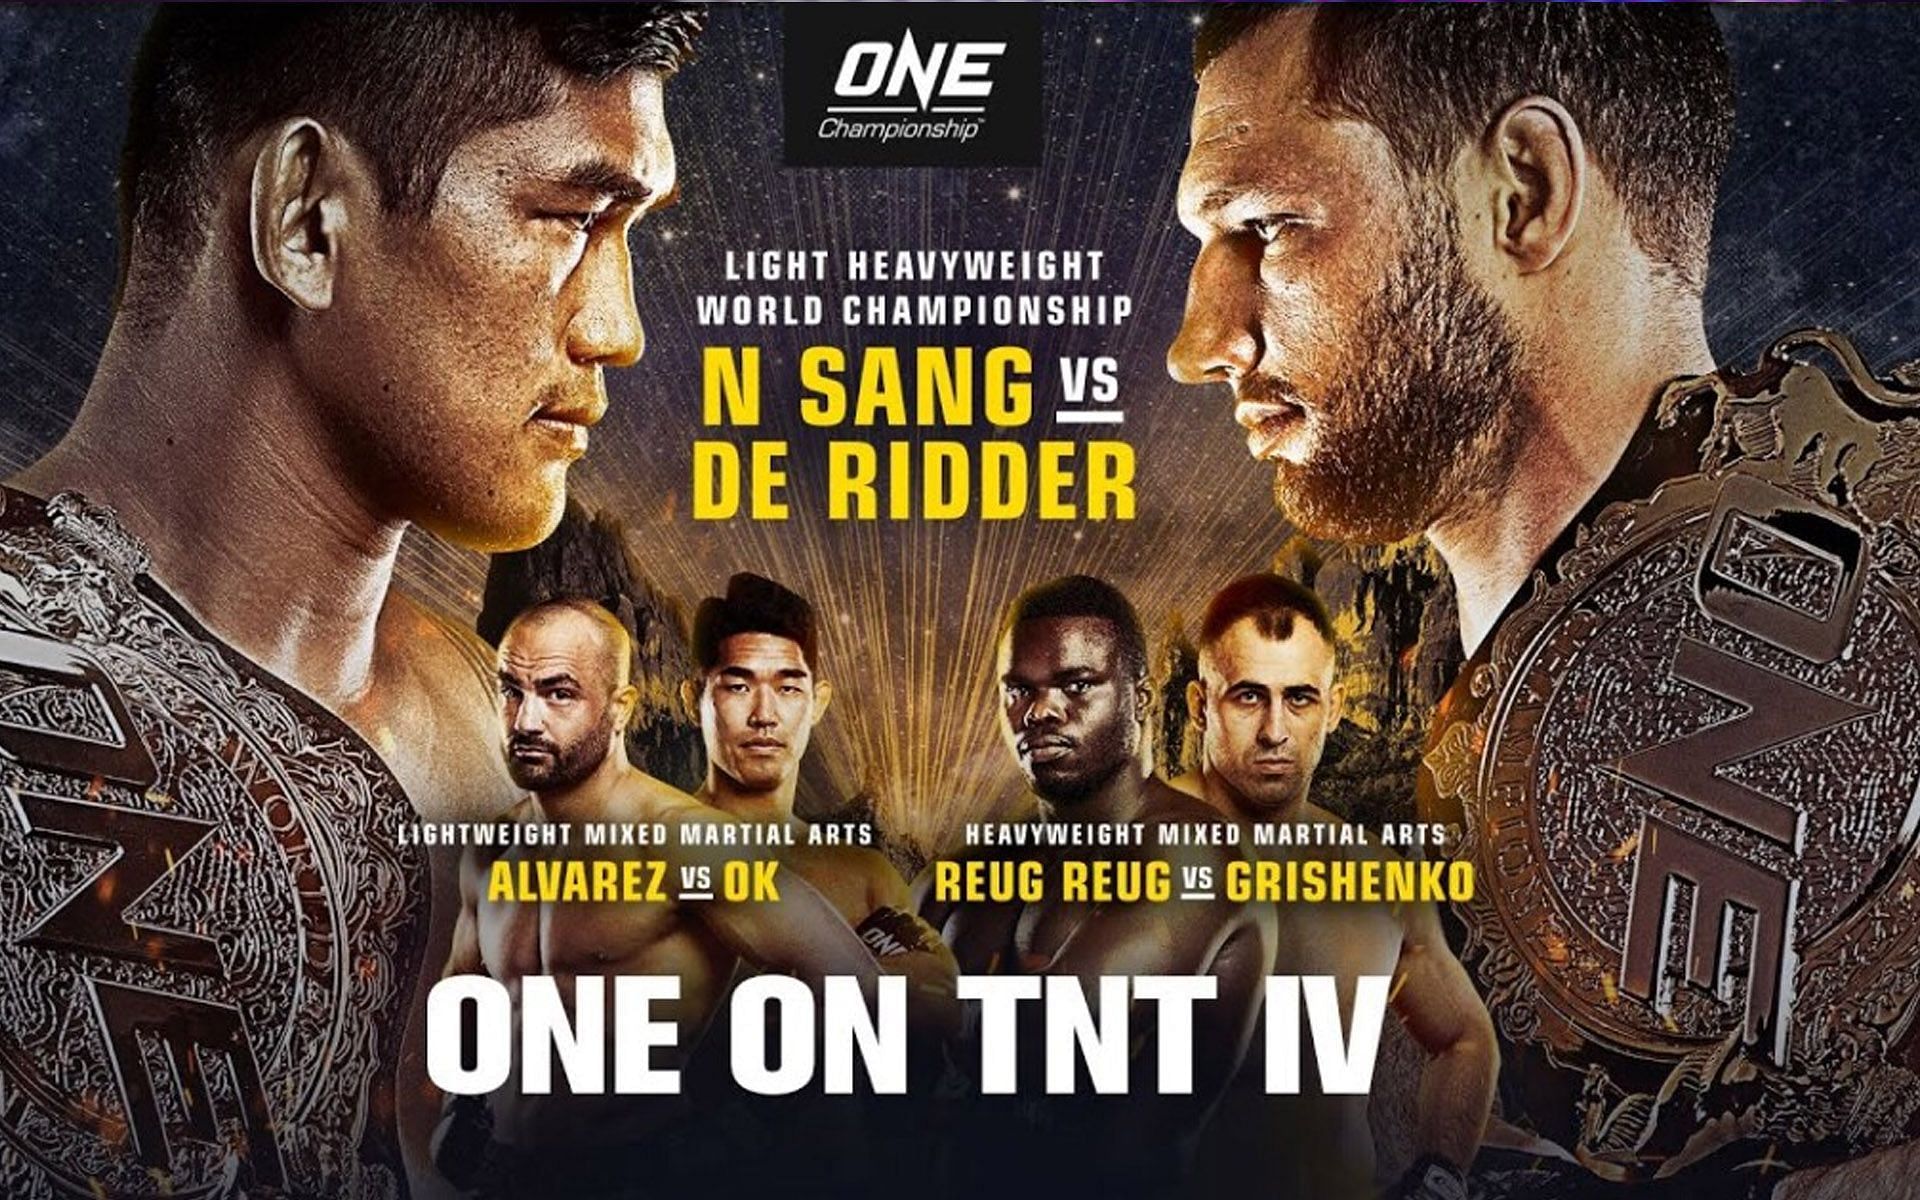 ONE on TNT IV happened a year ago today. | [Photo: ONE Championship]